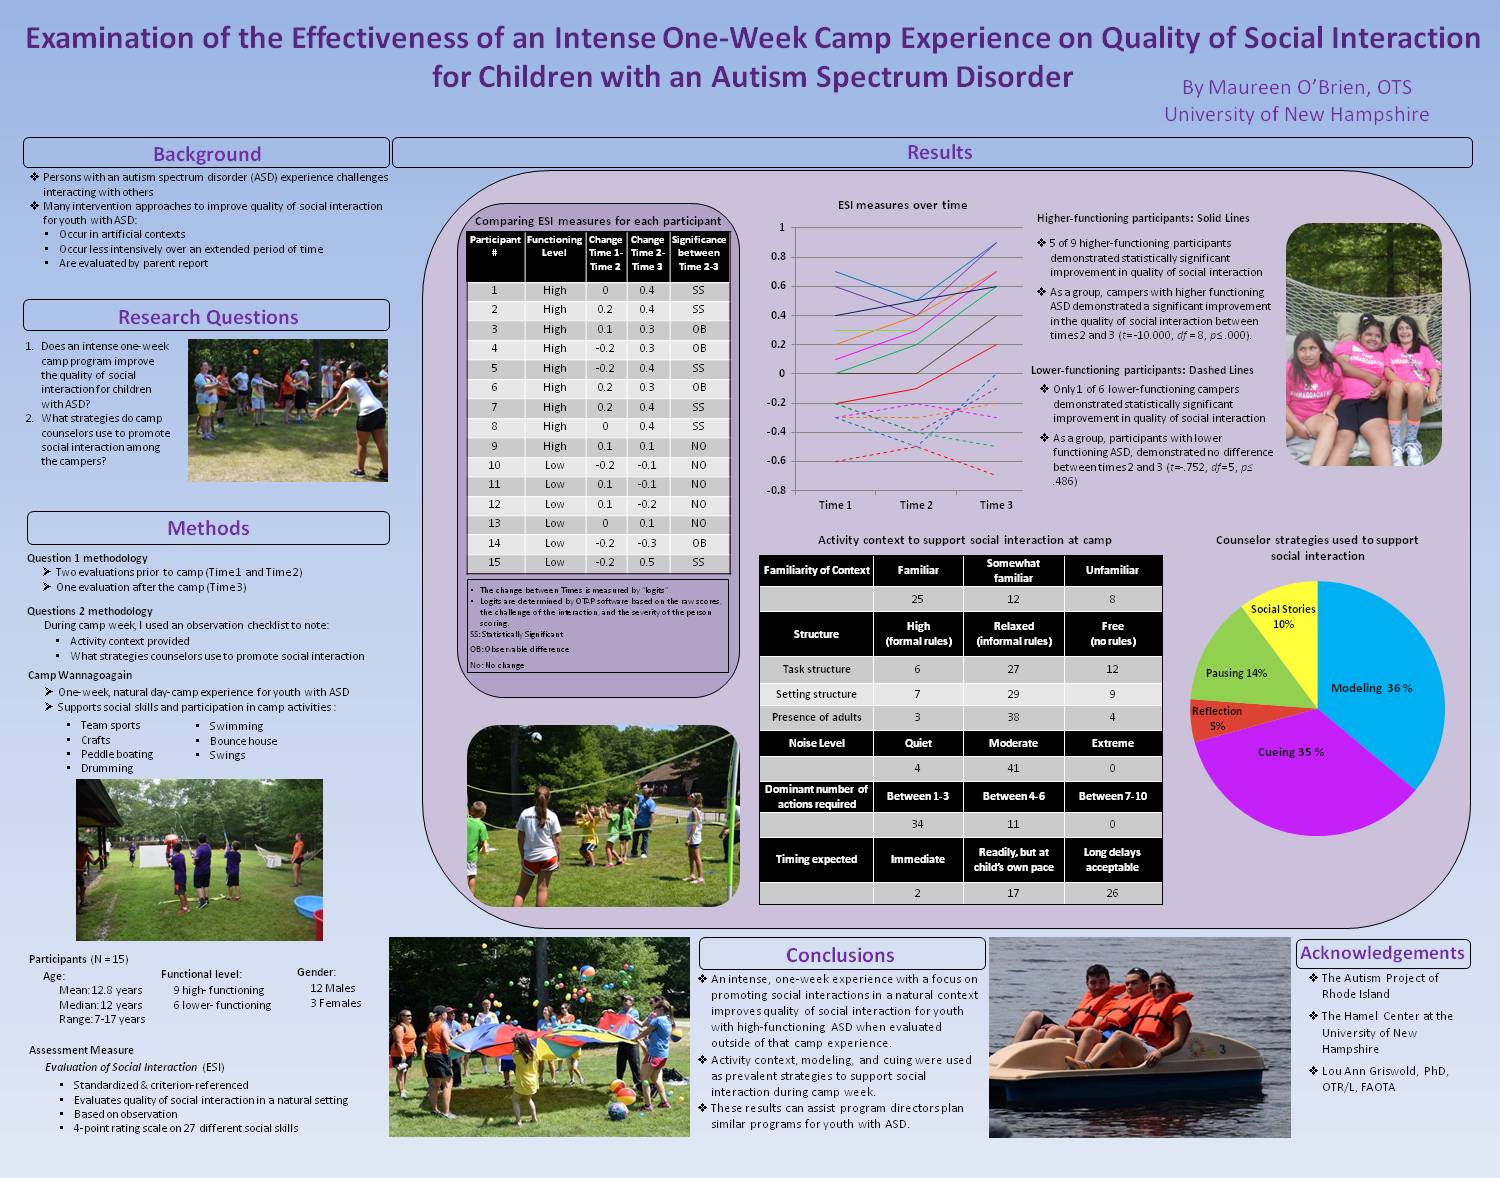 Examination Of The Effectiveness Of An Intense One-Week Camp Experience On Quality Of Social Interaction For Children With An Autism Spectrum Disorder by mlc232